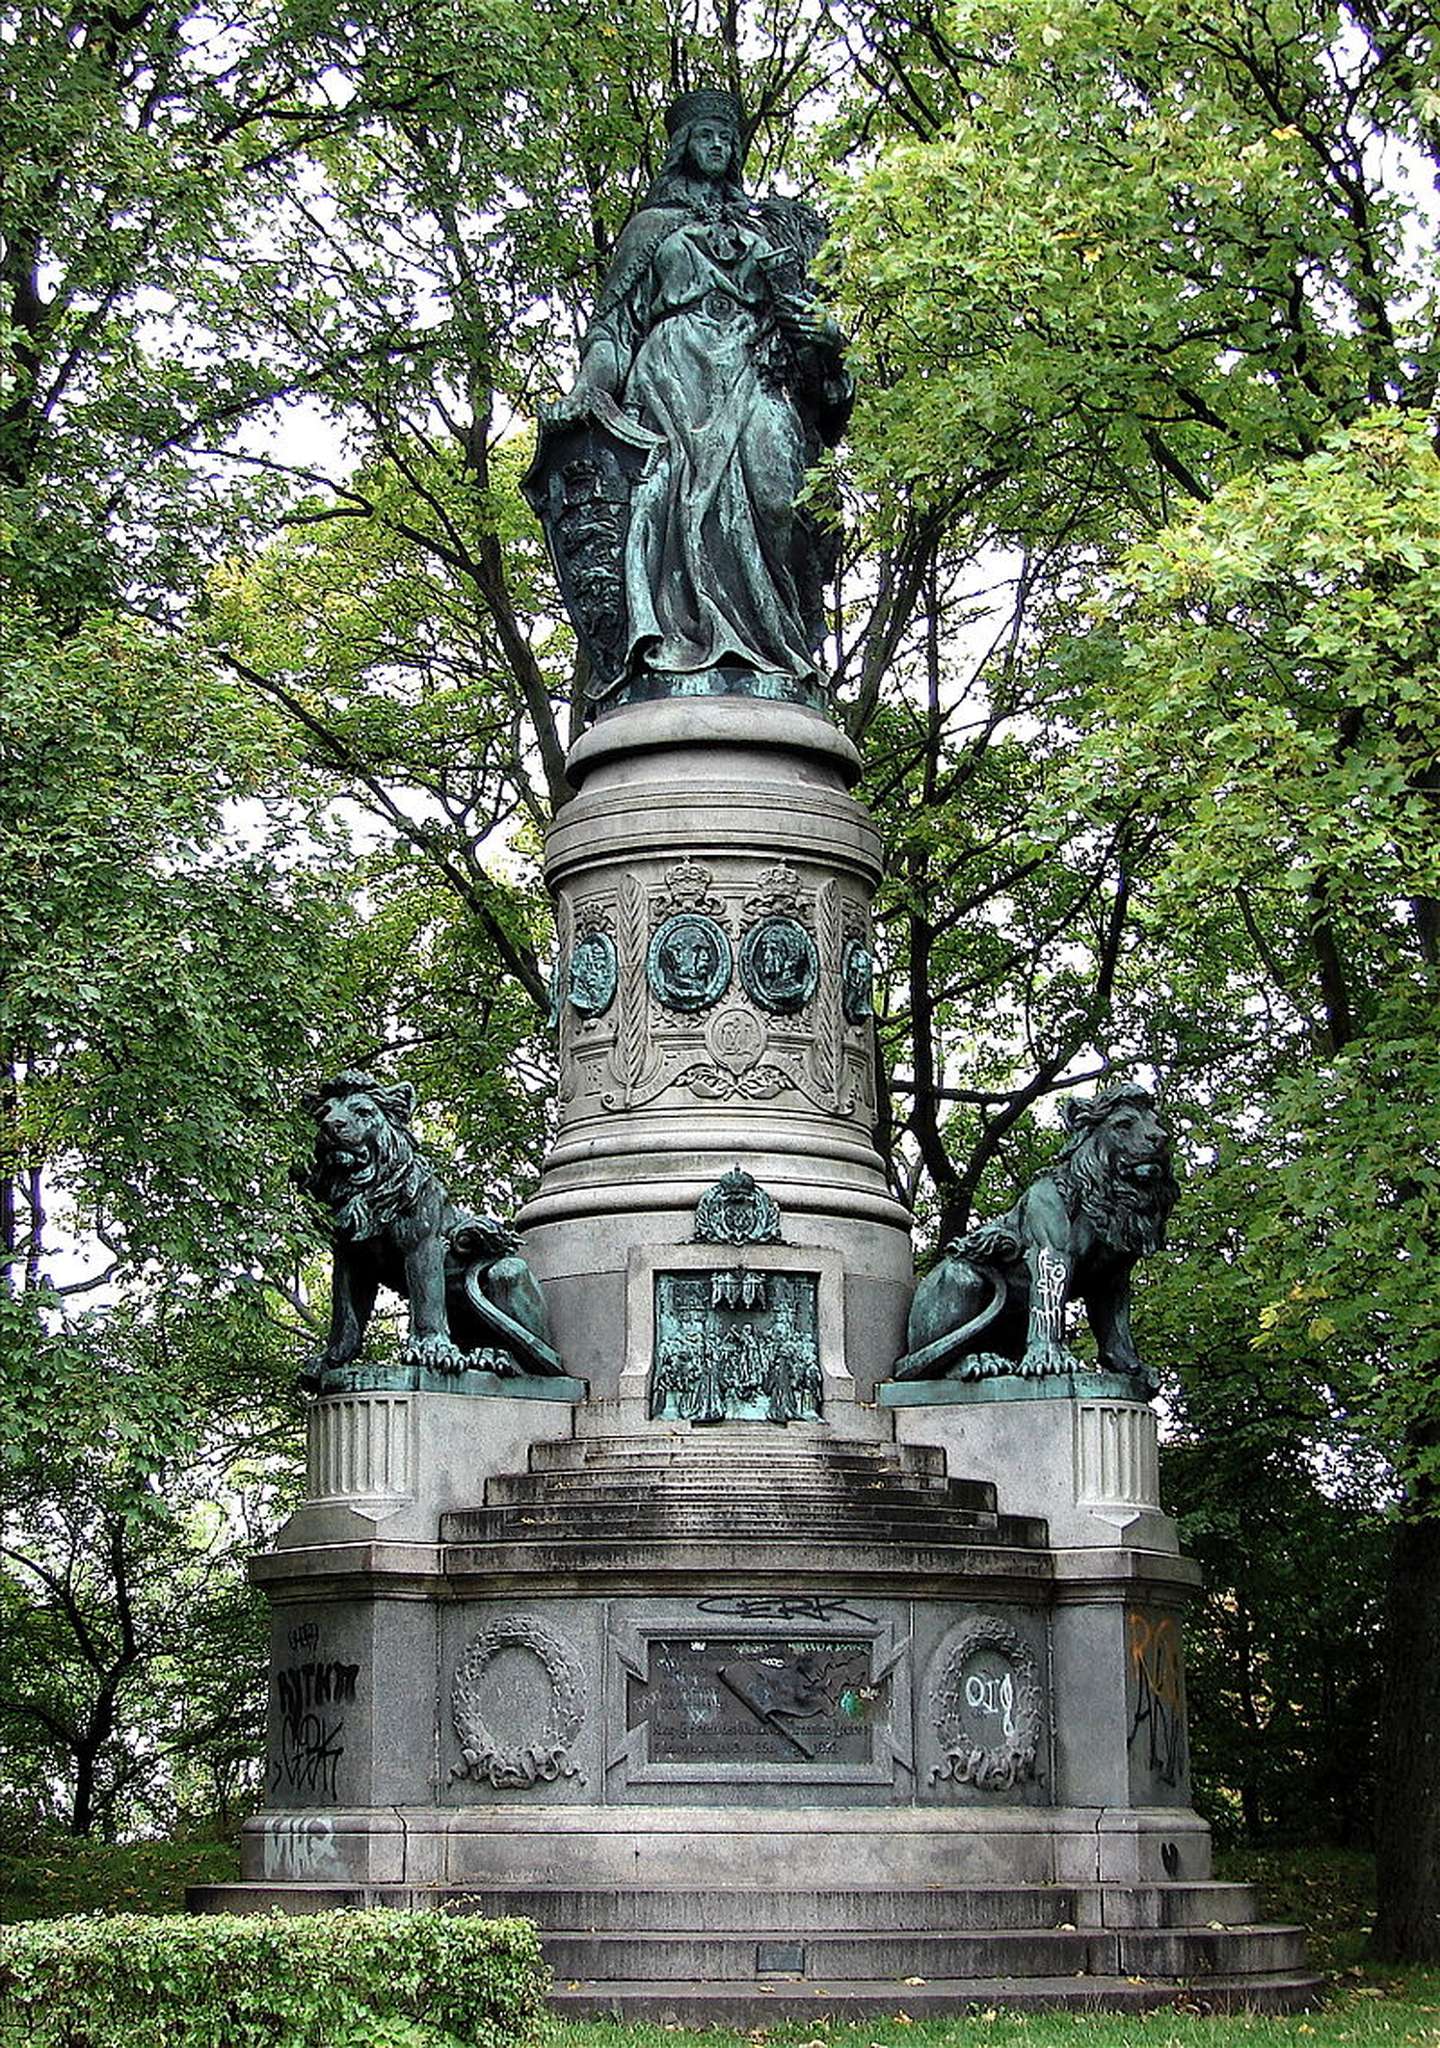 The "Denmark Monument" in Østre Anlæg was erected to celebrate the golden wedding of King Christian IX and Queen Louise on 26 May 1892